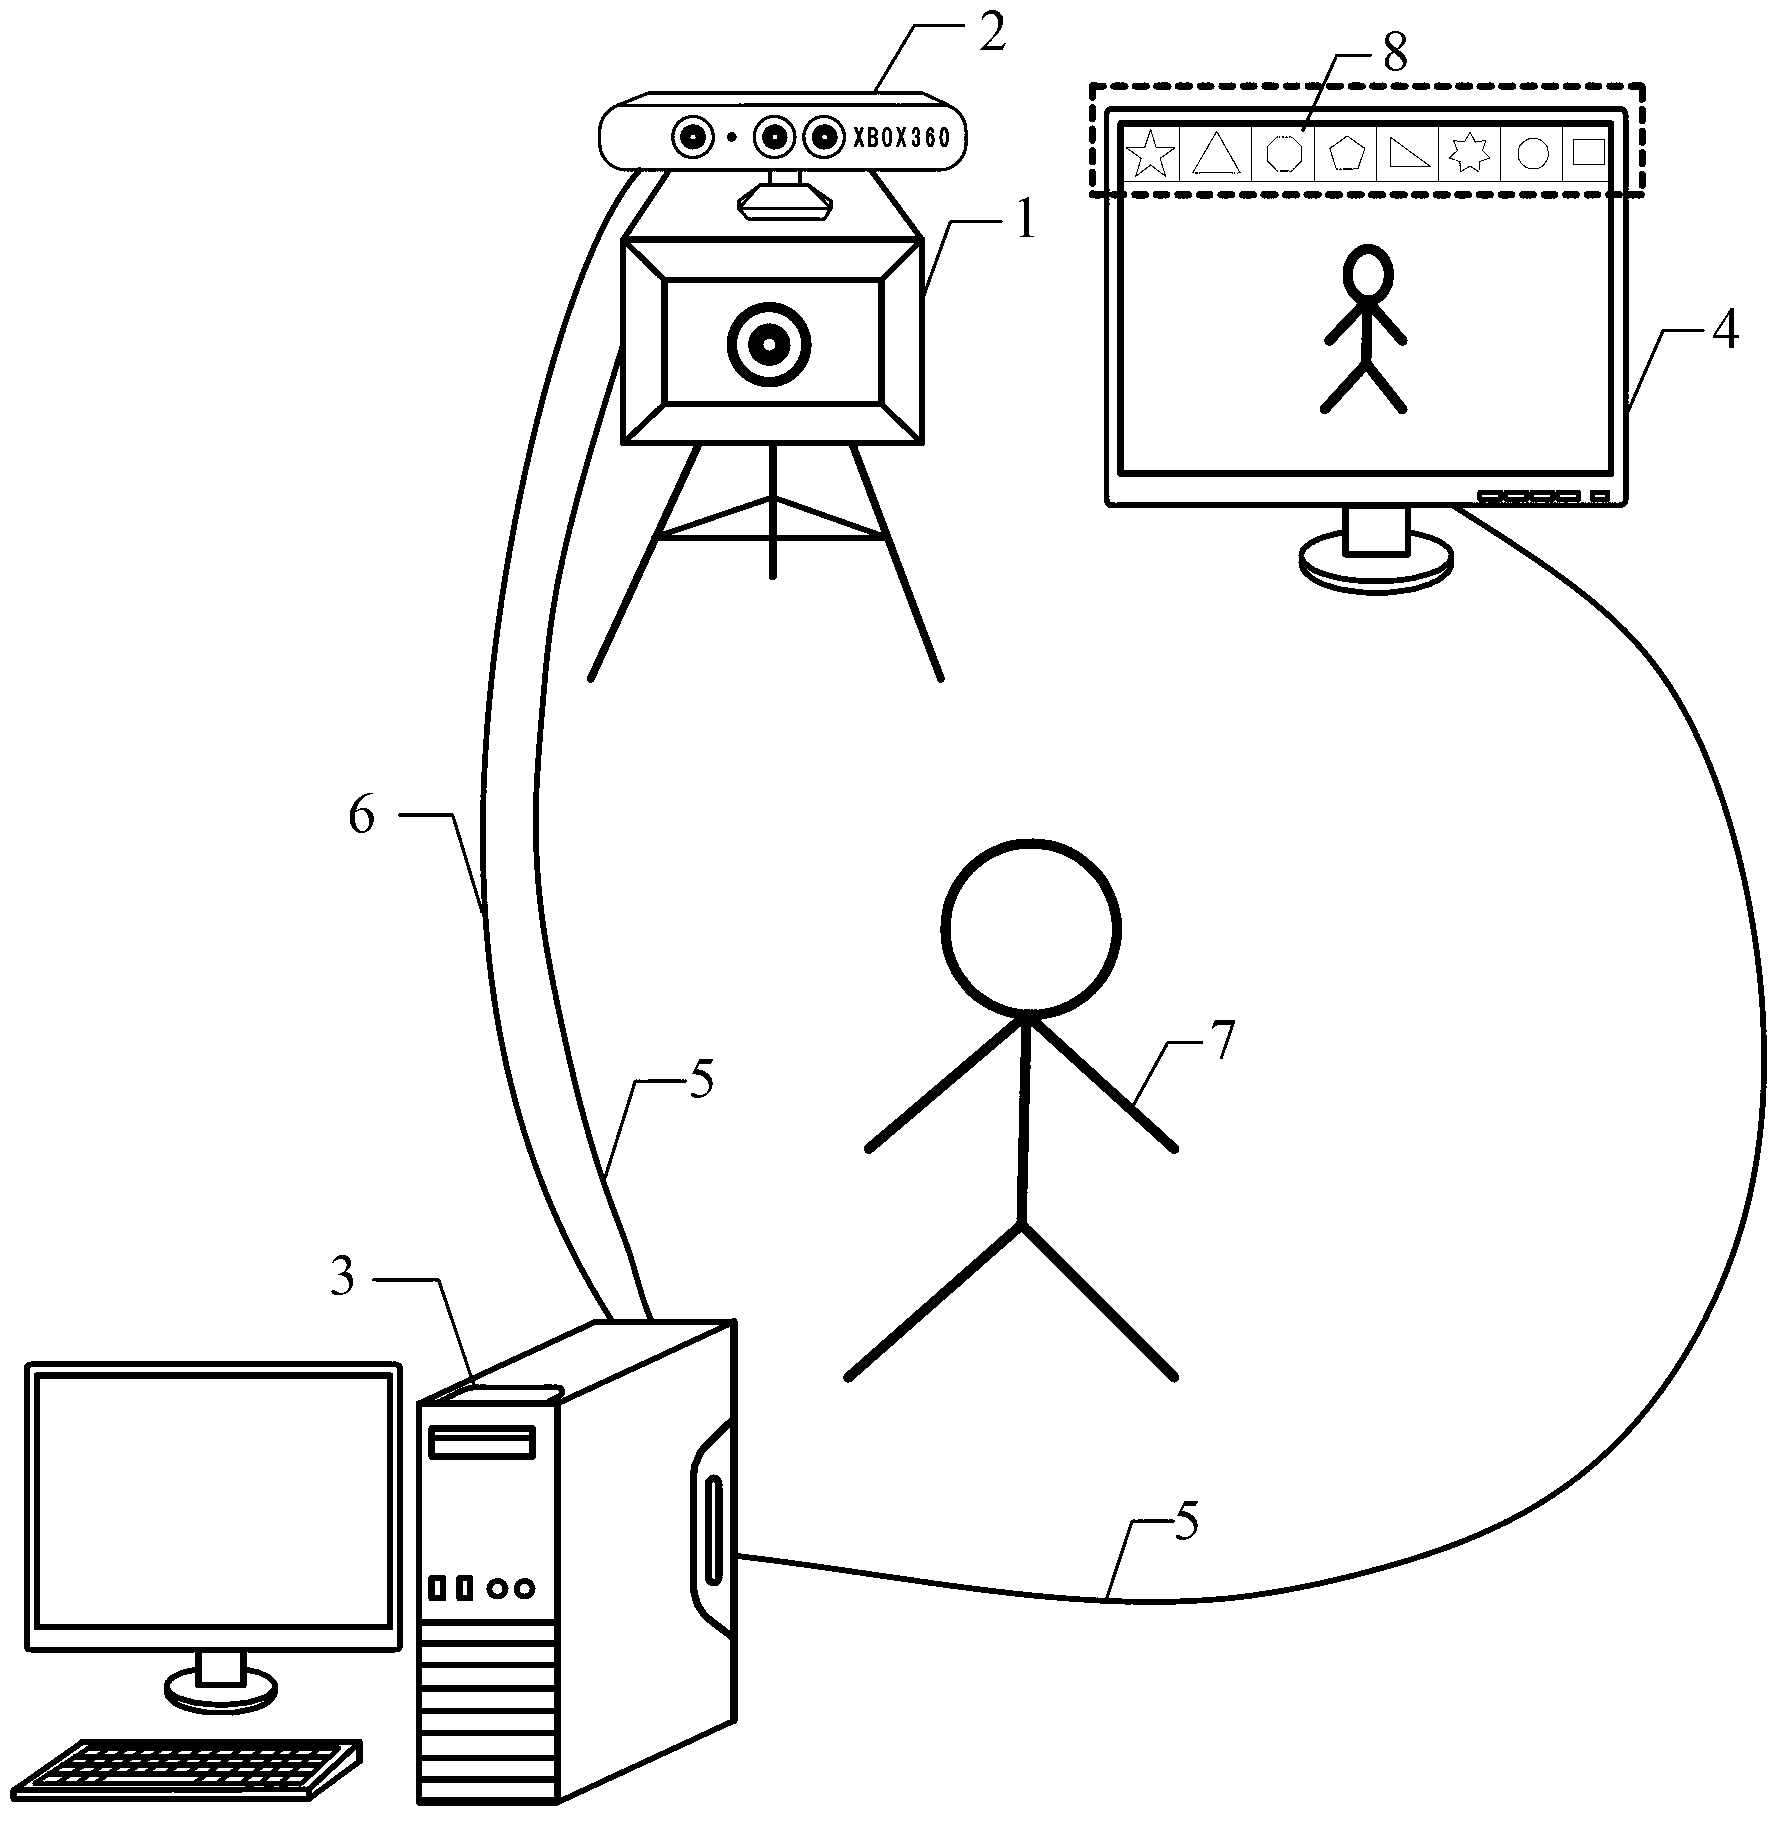 Television program host interaction system based on Kinect